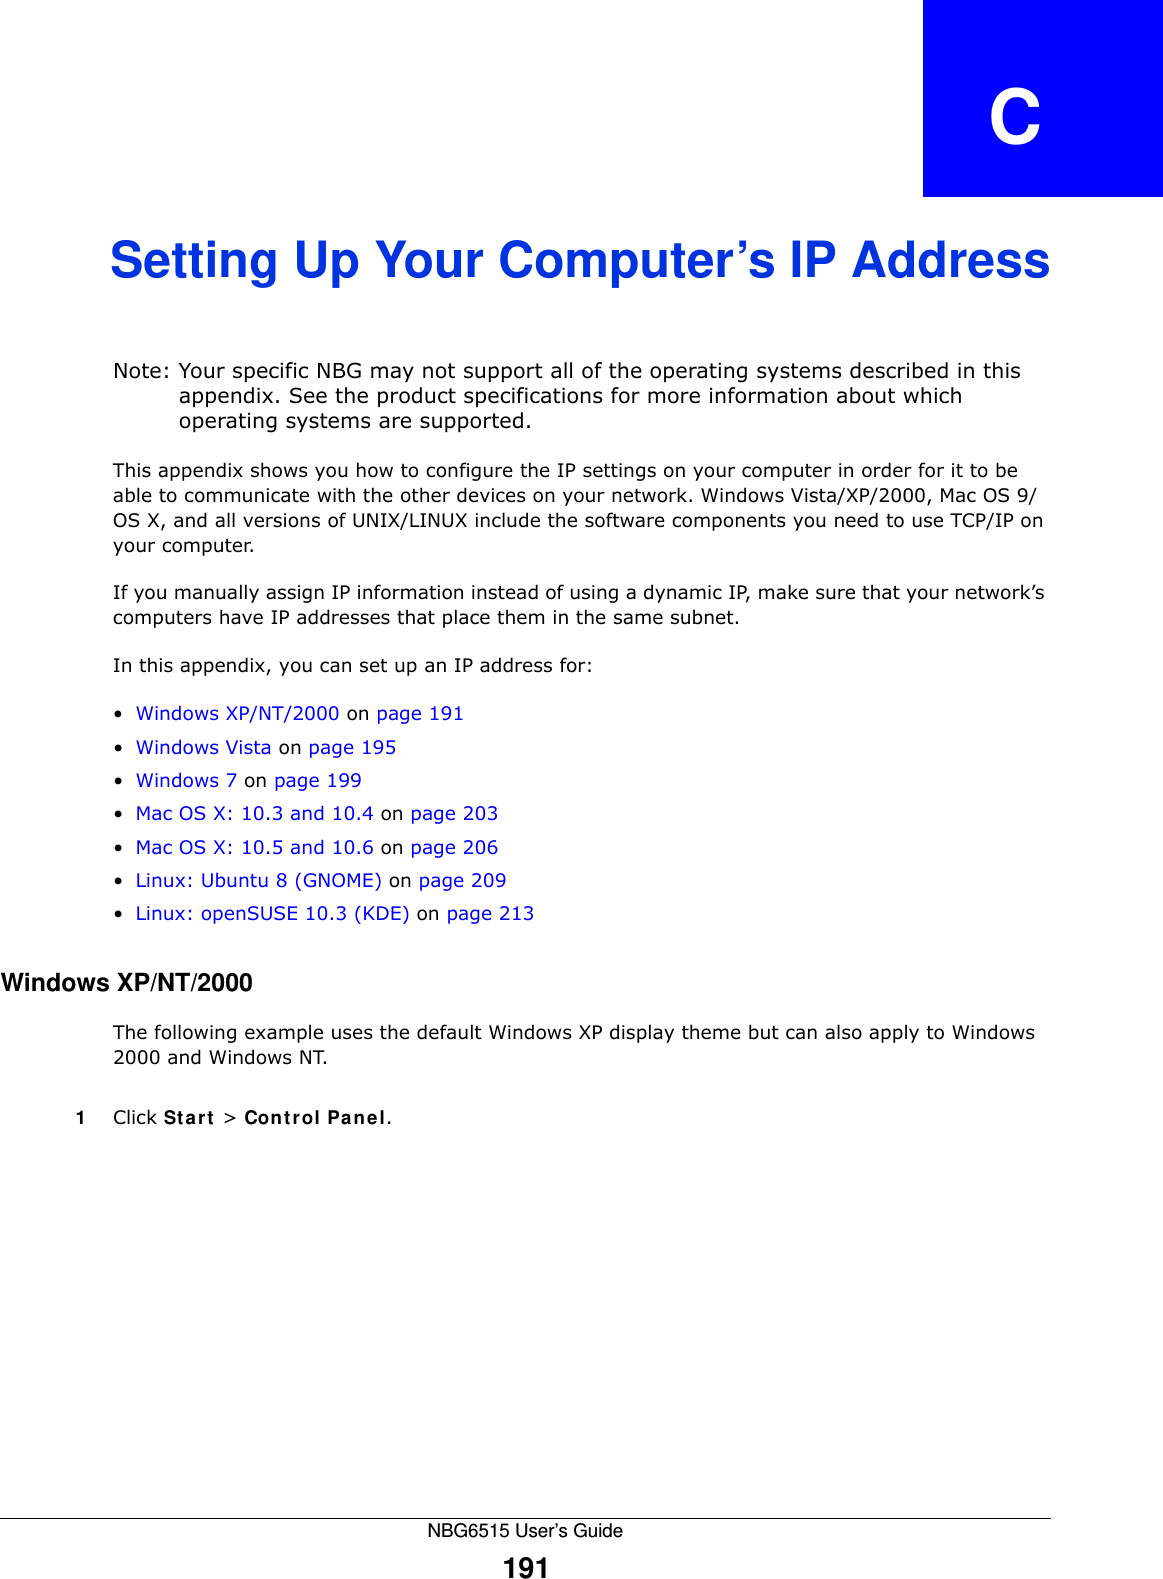 NBG6515 User’s Guide191APPENDIX   CSetting Up Your Computer’s IP AddressNote: Your specific NBG may not support all of the operating systems described in this appendix. See the product specifications for more information about which operating systems are supported.This appendix shows you how to configure the IP settings on your computer in order for it to be able to communicate with the other devices on your network. Windows Vista/XP/2000, Mac OS 9/OS X, and all versions of UNIX/LINUX include the software components you need to use TCP/IP on your computer. If you manually assign IP information instead of using a dynamic IP, make sure that your network’s computers have IP addresses that place them in the same subnet.In this appendix, you can set up an IP address for:•Windows XP/NT/2000 on page 191•Windows Vista on page 195•Windows 7 on page 199•Mac OS X: 10.3 and 10.4 on page 203•Mac OS X: 10.5 and 10.6 on page 206•Linux: Ubuntu 8 (GNOME) on page 209•Linux: openSUSE 10.3 (KDE) on page 213Windows XP/NT/2000The following example uses the default Windows XP display theme but can also apply to Windows 2000 and Windows NT.1Click St a rt  &gt; Cont r ol Pa n el.